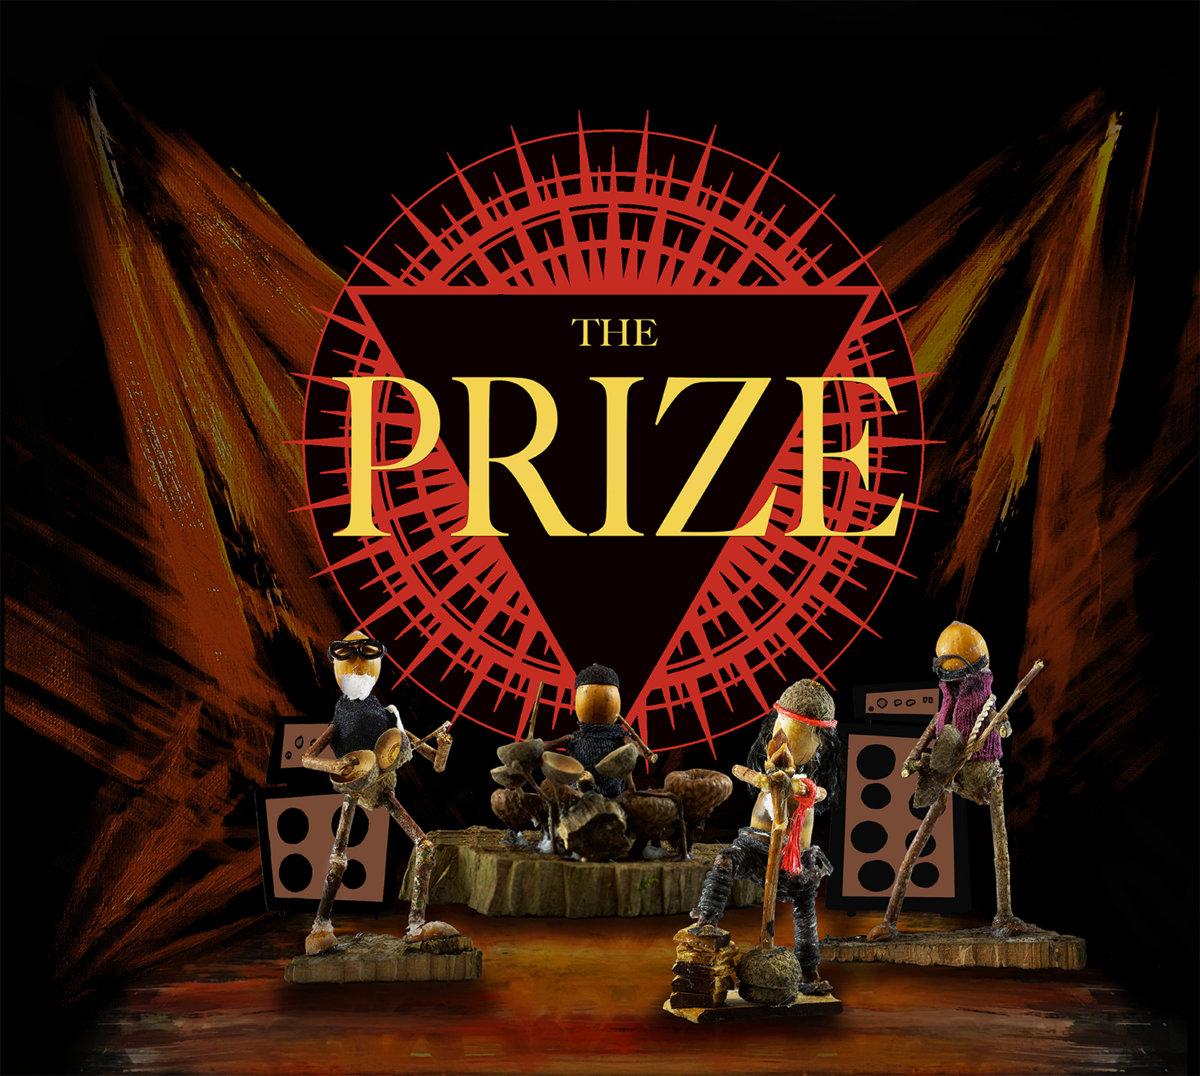 The prize cover